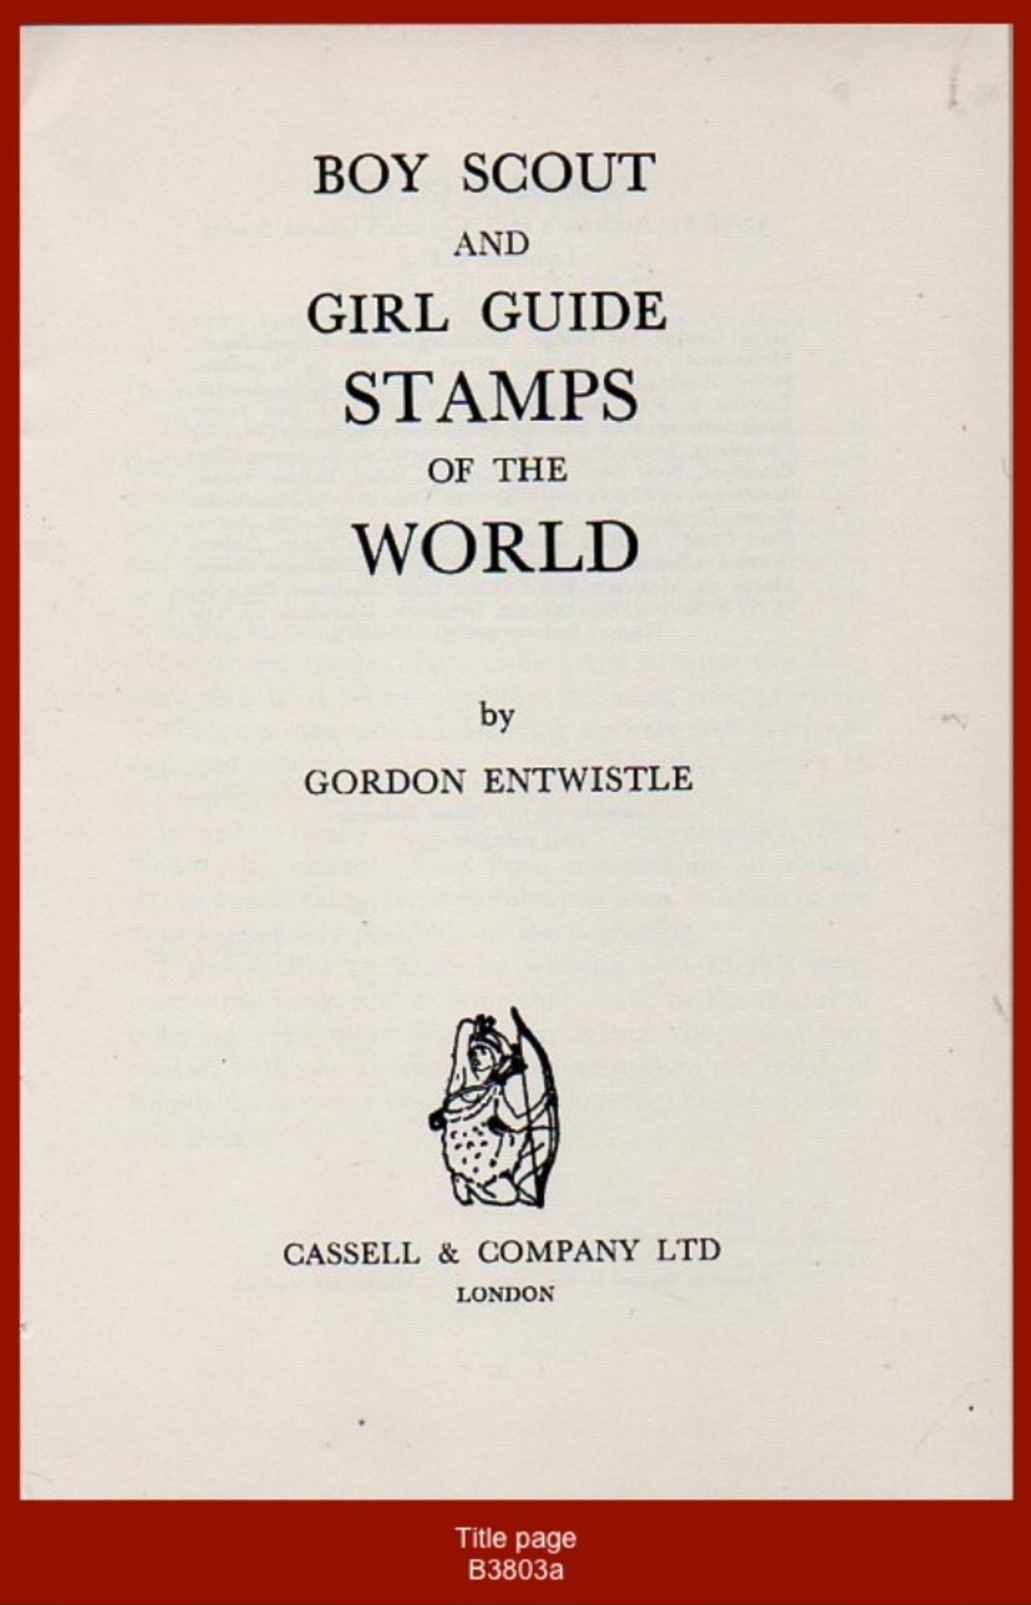 B3803 B3803a B3803b  Gordon Entwistle. &ldquo;BOY SCOUT AND GIRL GUIDE STAMPS OF THE WORLD&rdquo; - Scouting